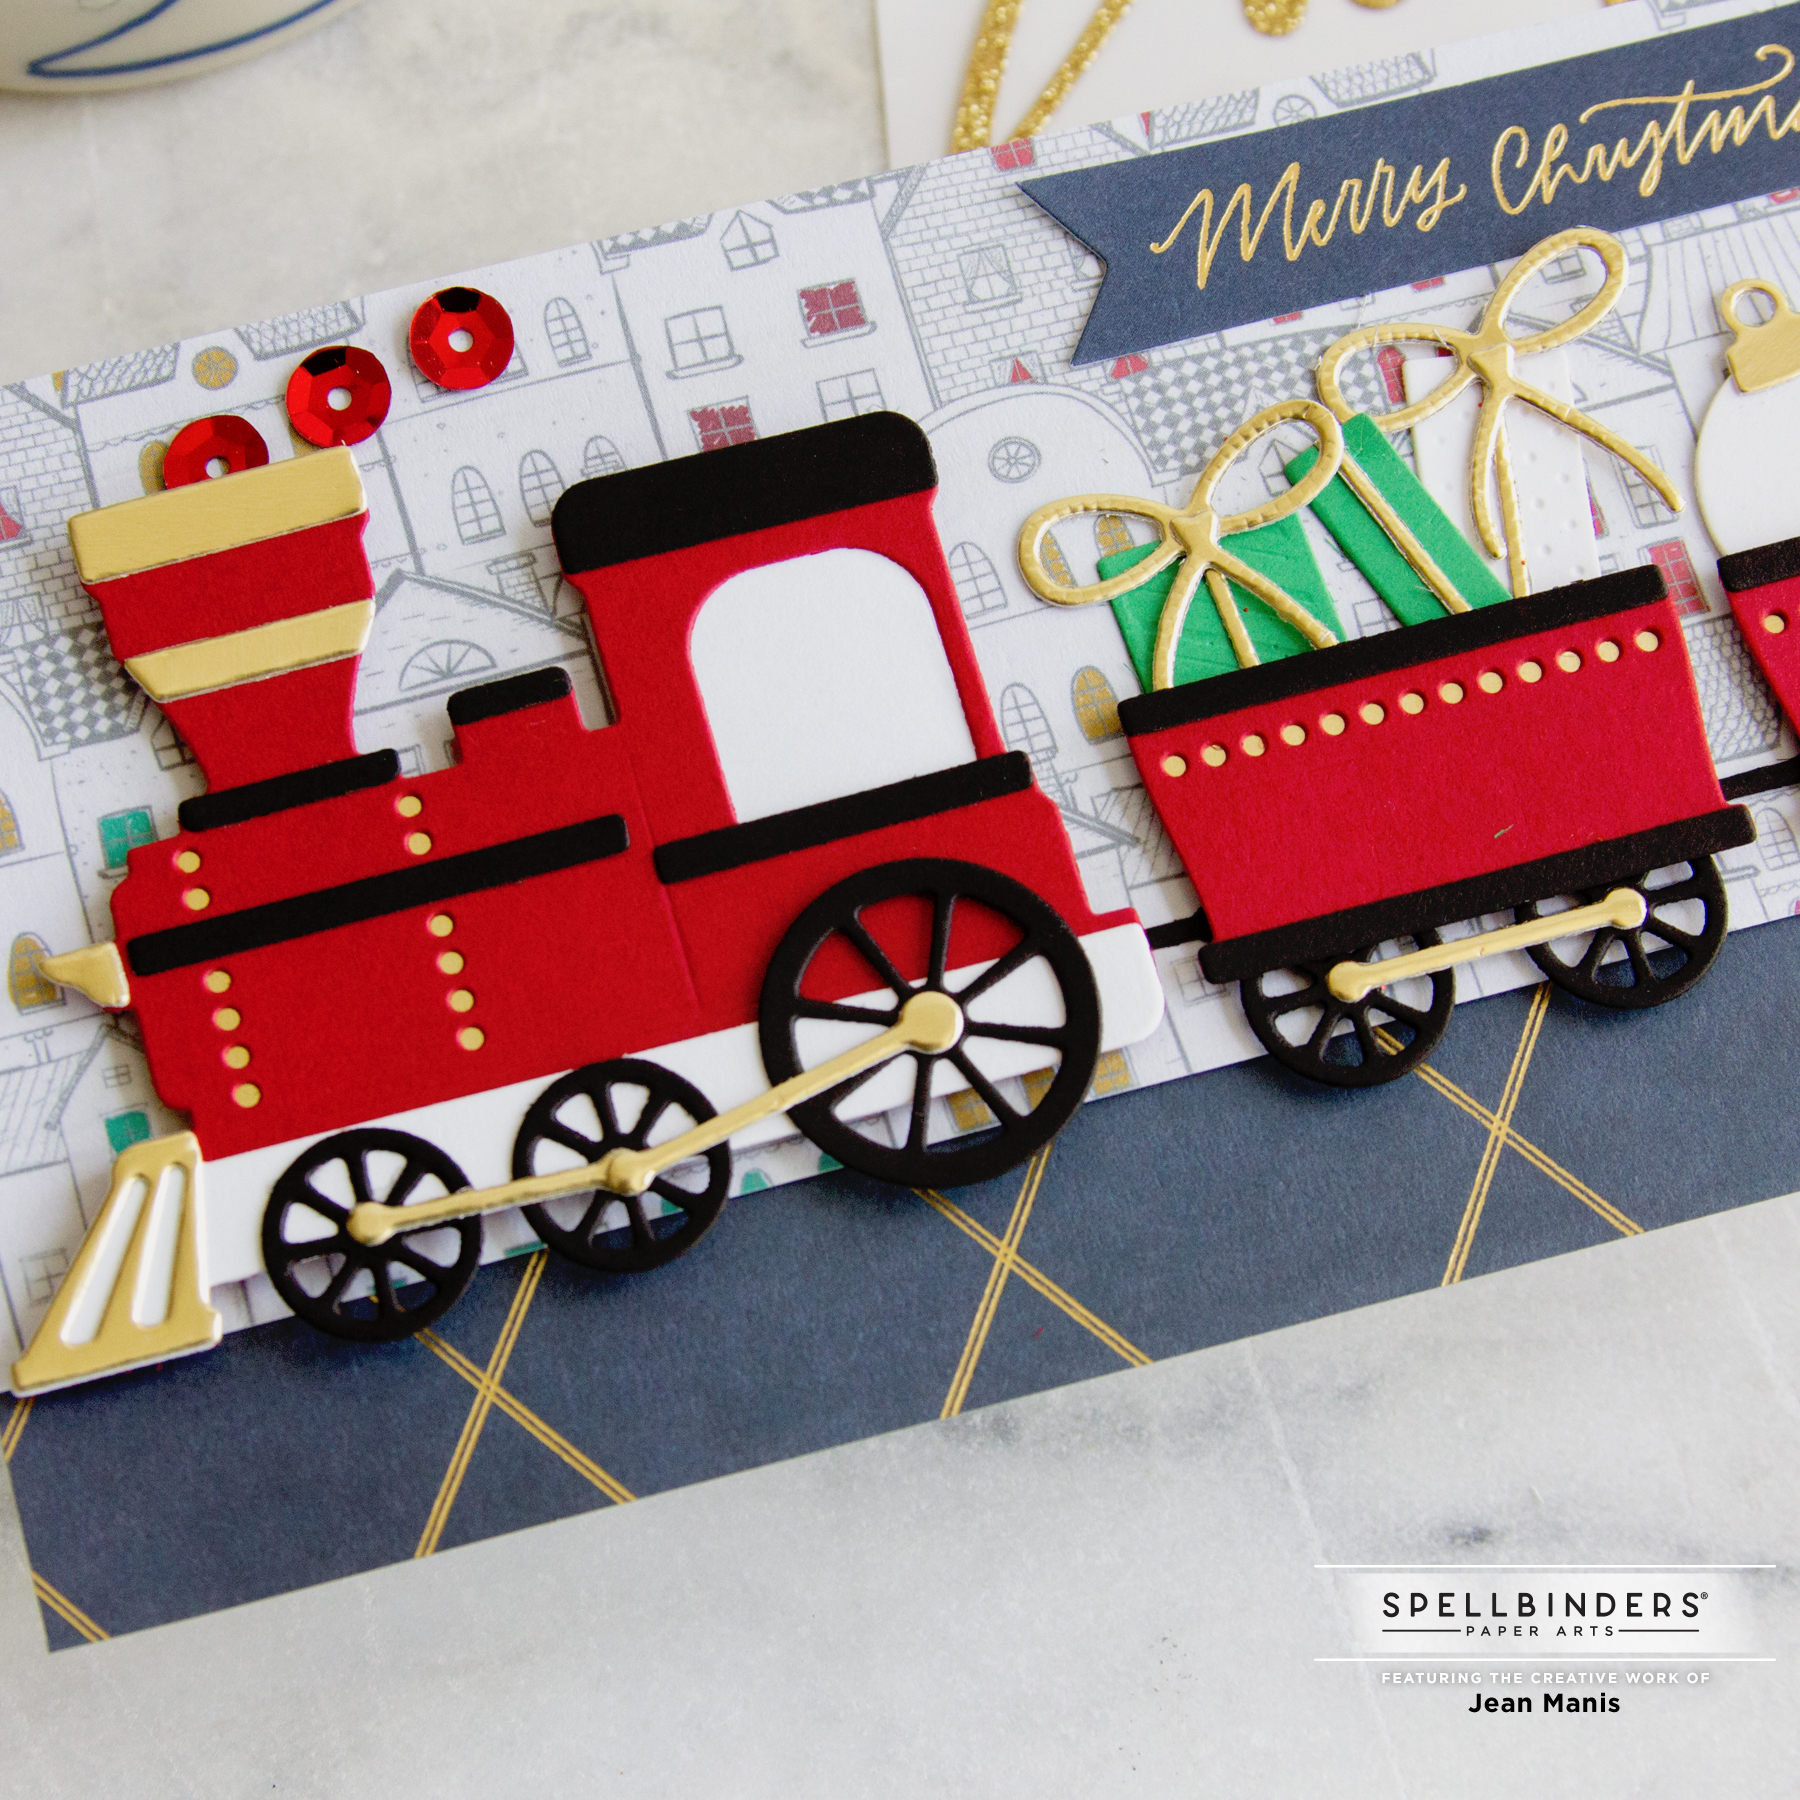 Spellbinders All Aboard Christmas Kit 2021 Limited Edition